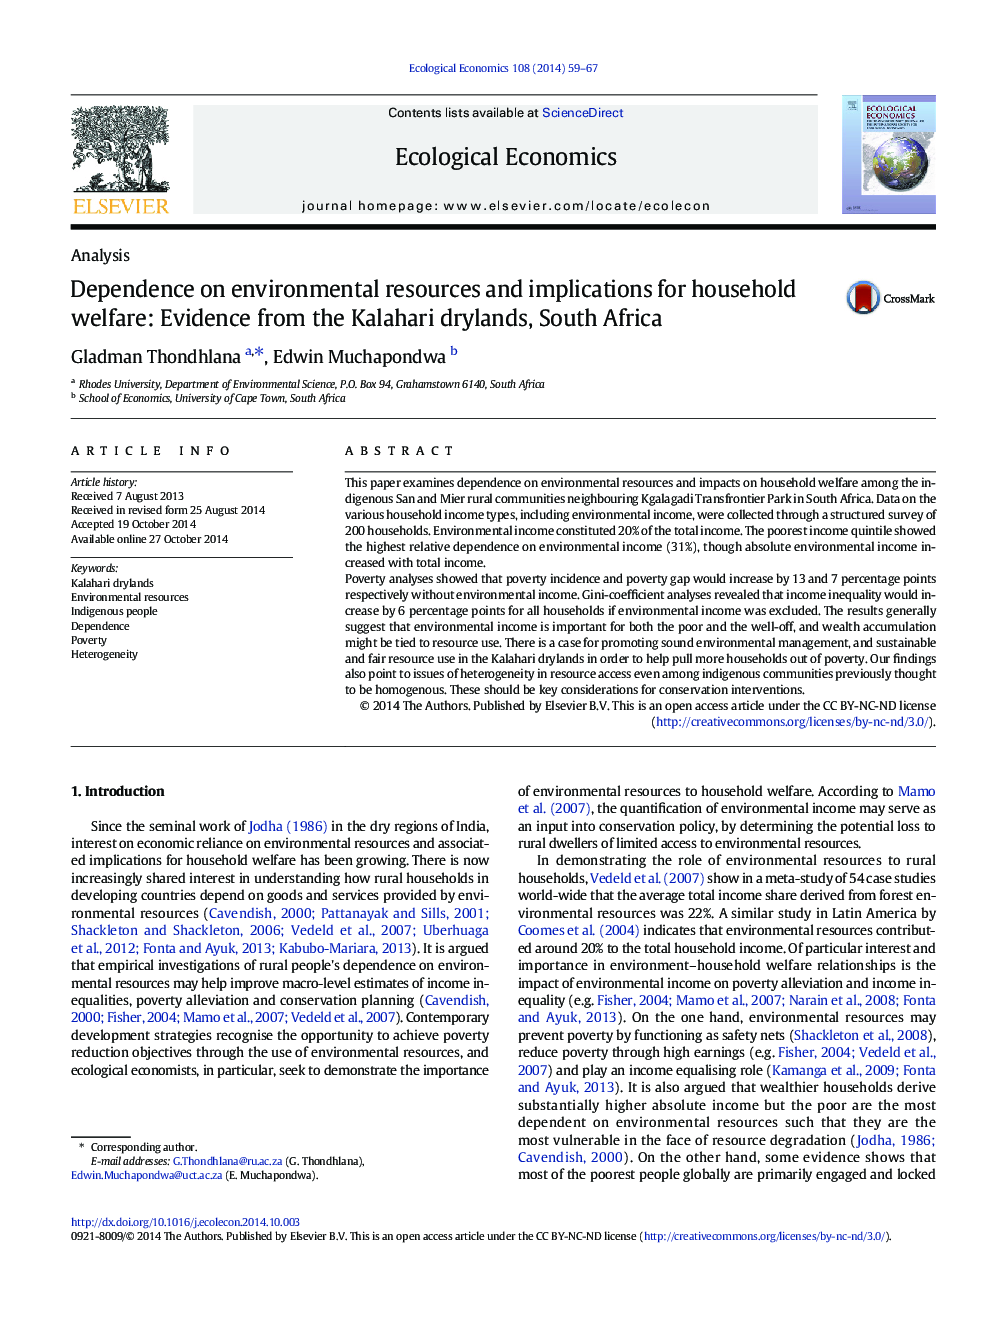 Dependence on environmental resources and implications for household welfare: Evidence from the Kalahari drylands, South Africa